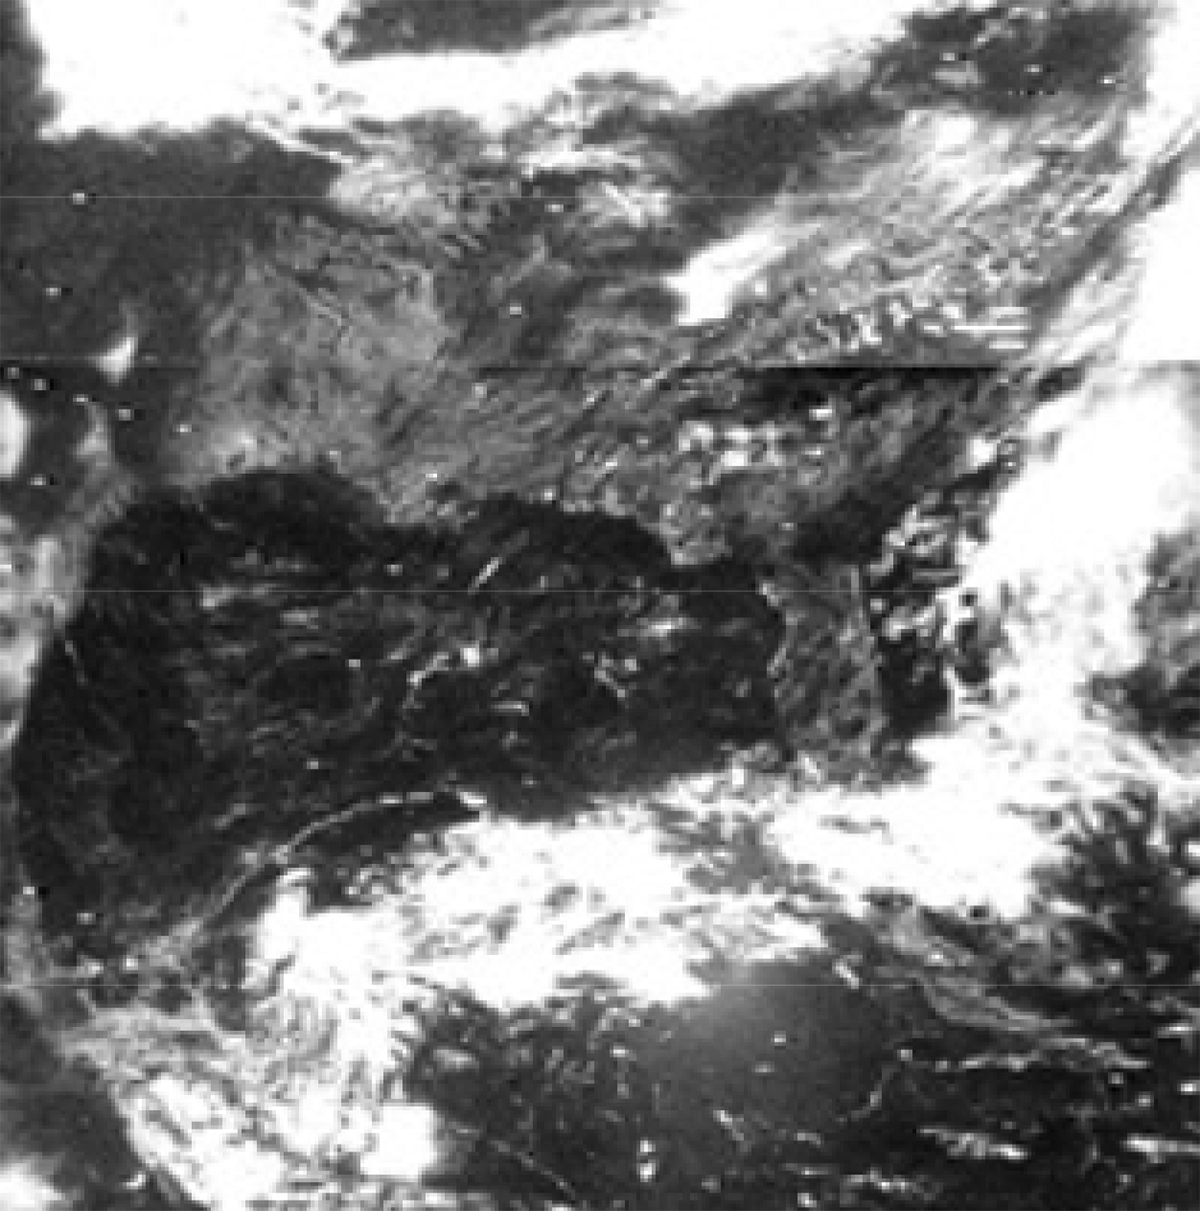 Nimbus-3 image showing clouds over the southeastern U.S. The image is very old looking, grainy, and in black and white. 